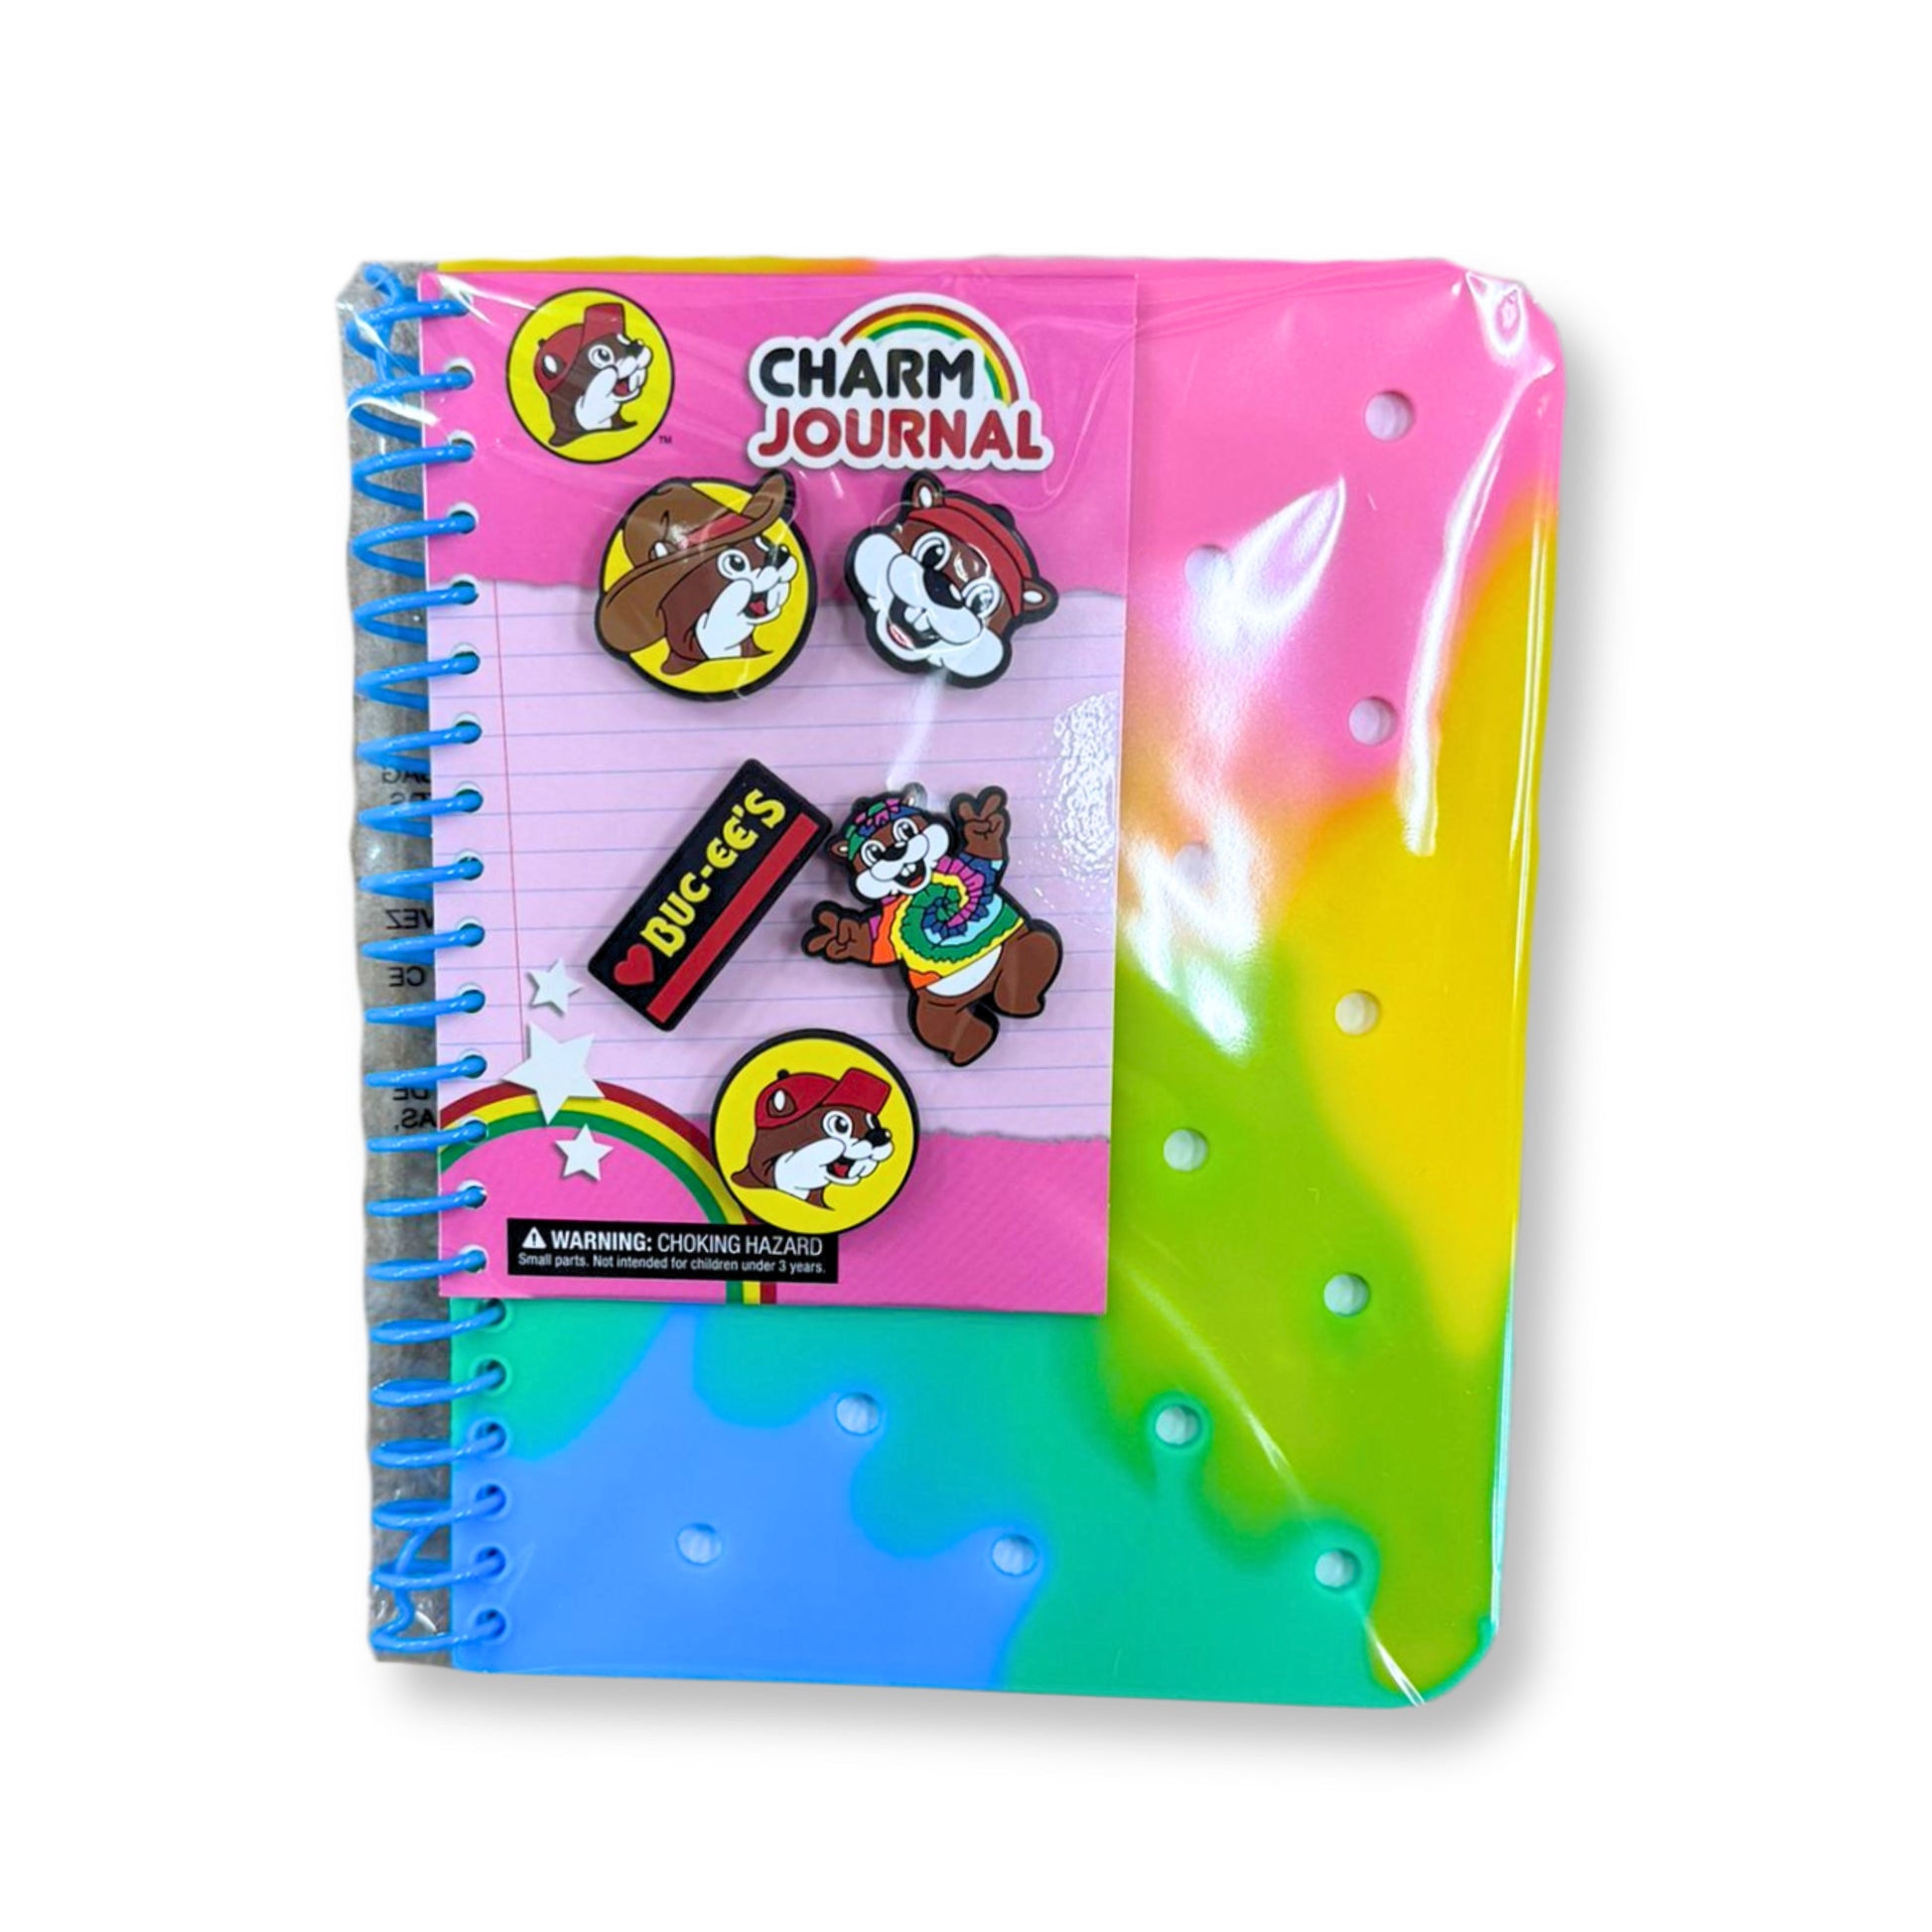 buc-ees journal charms